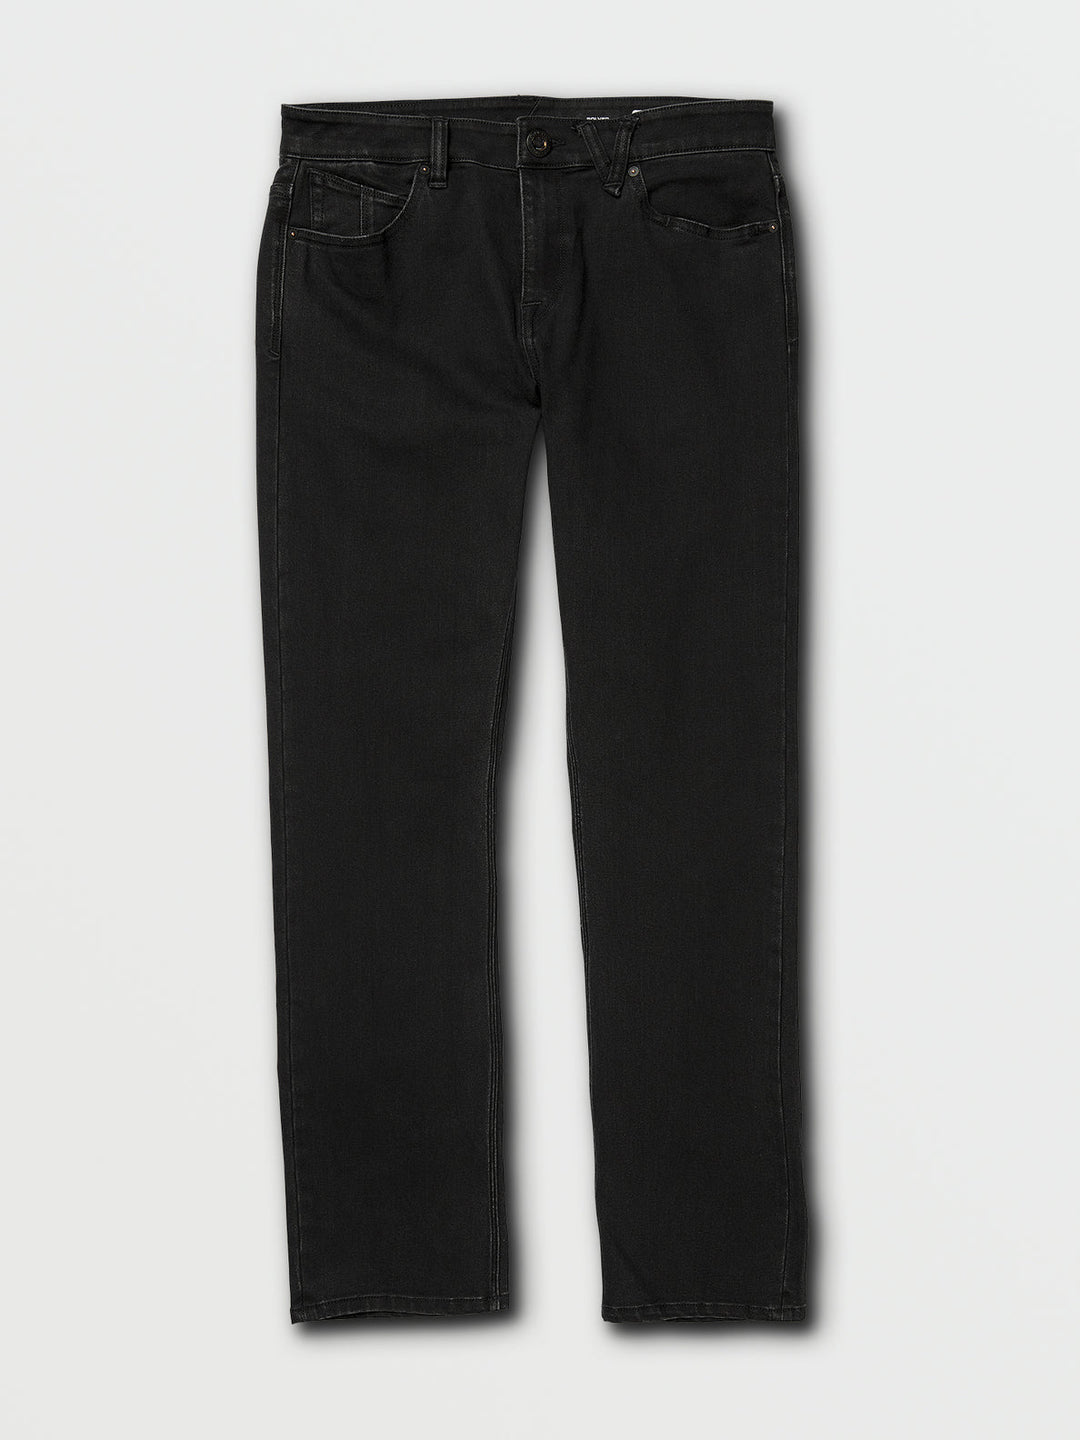 Volcom Solver Modern Fit Jeans - Black Out (Front)